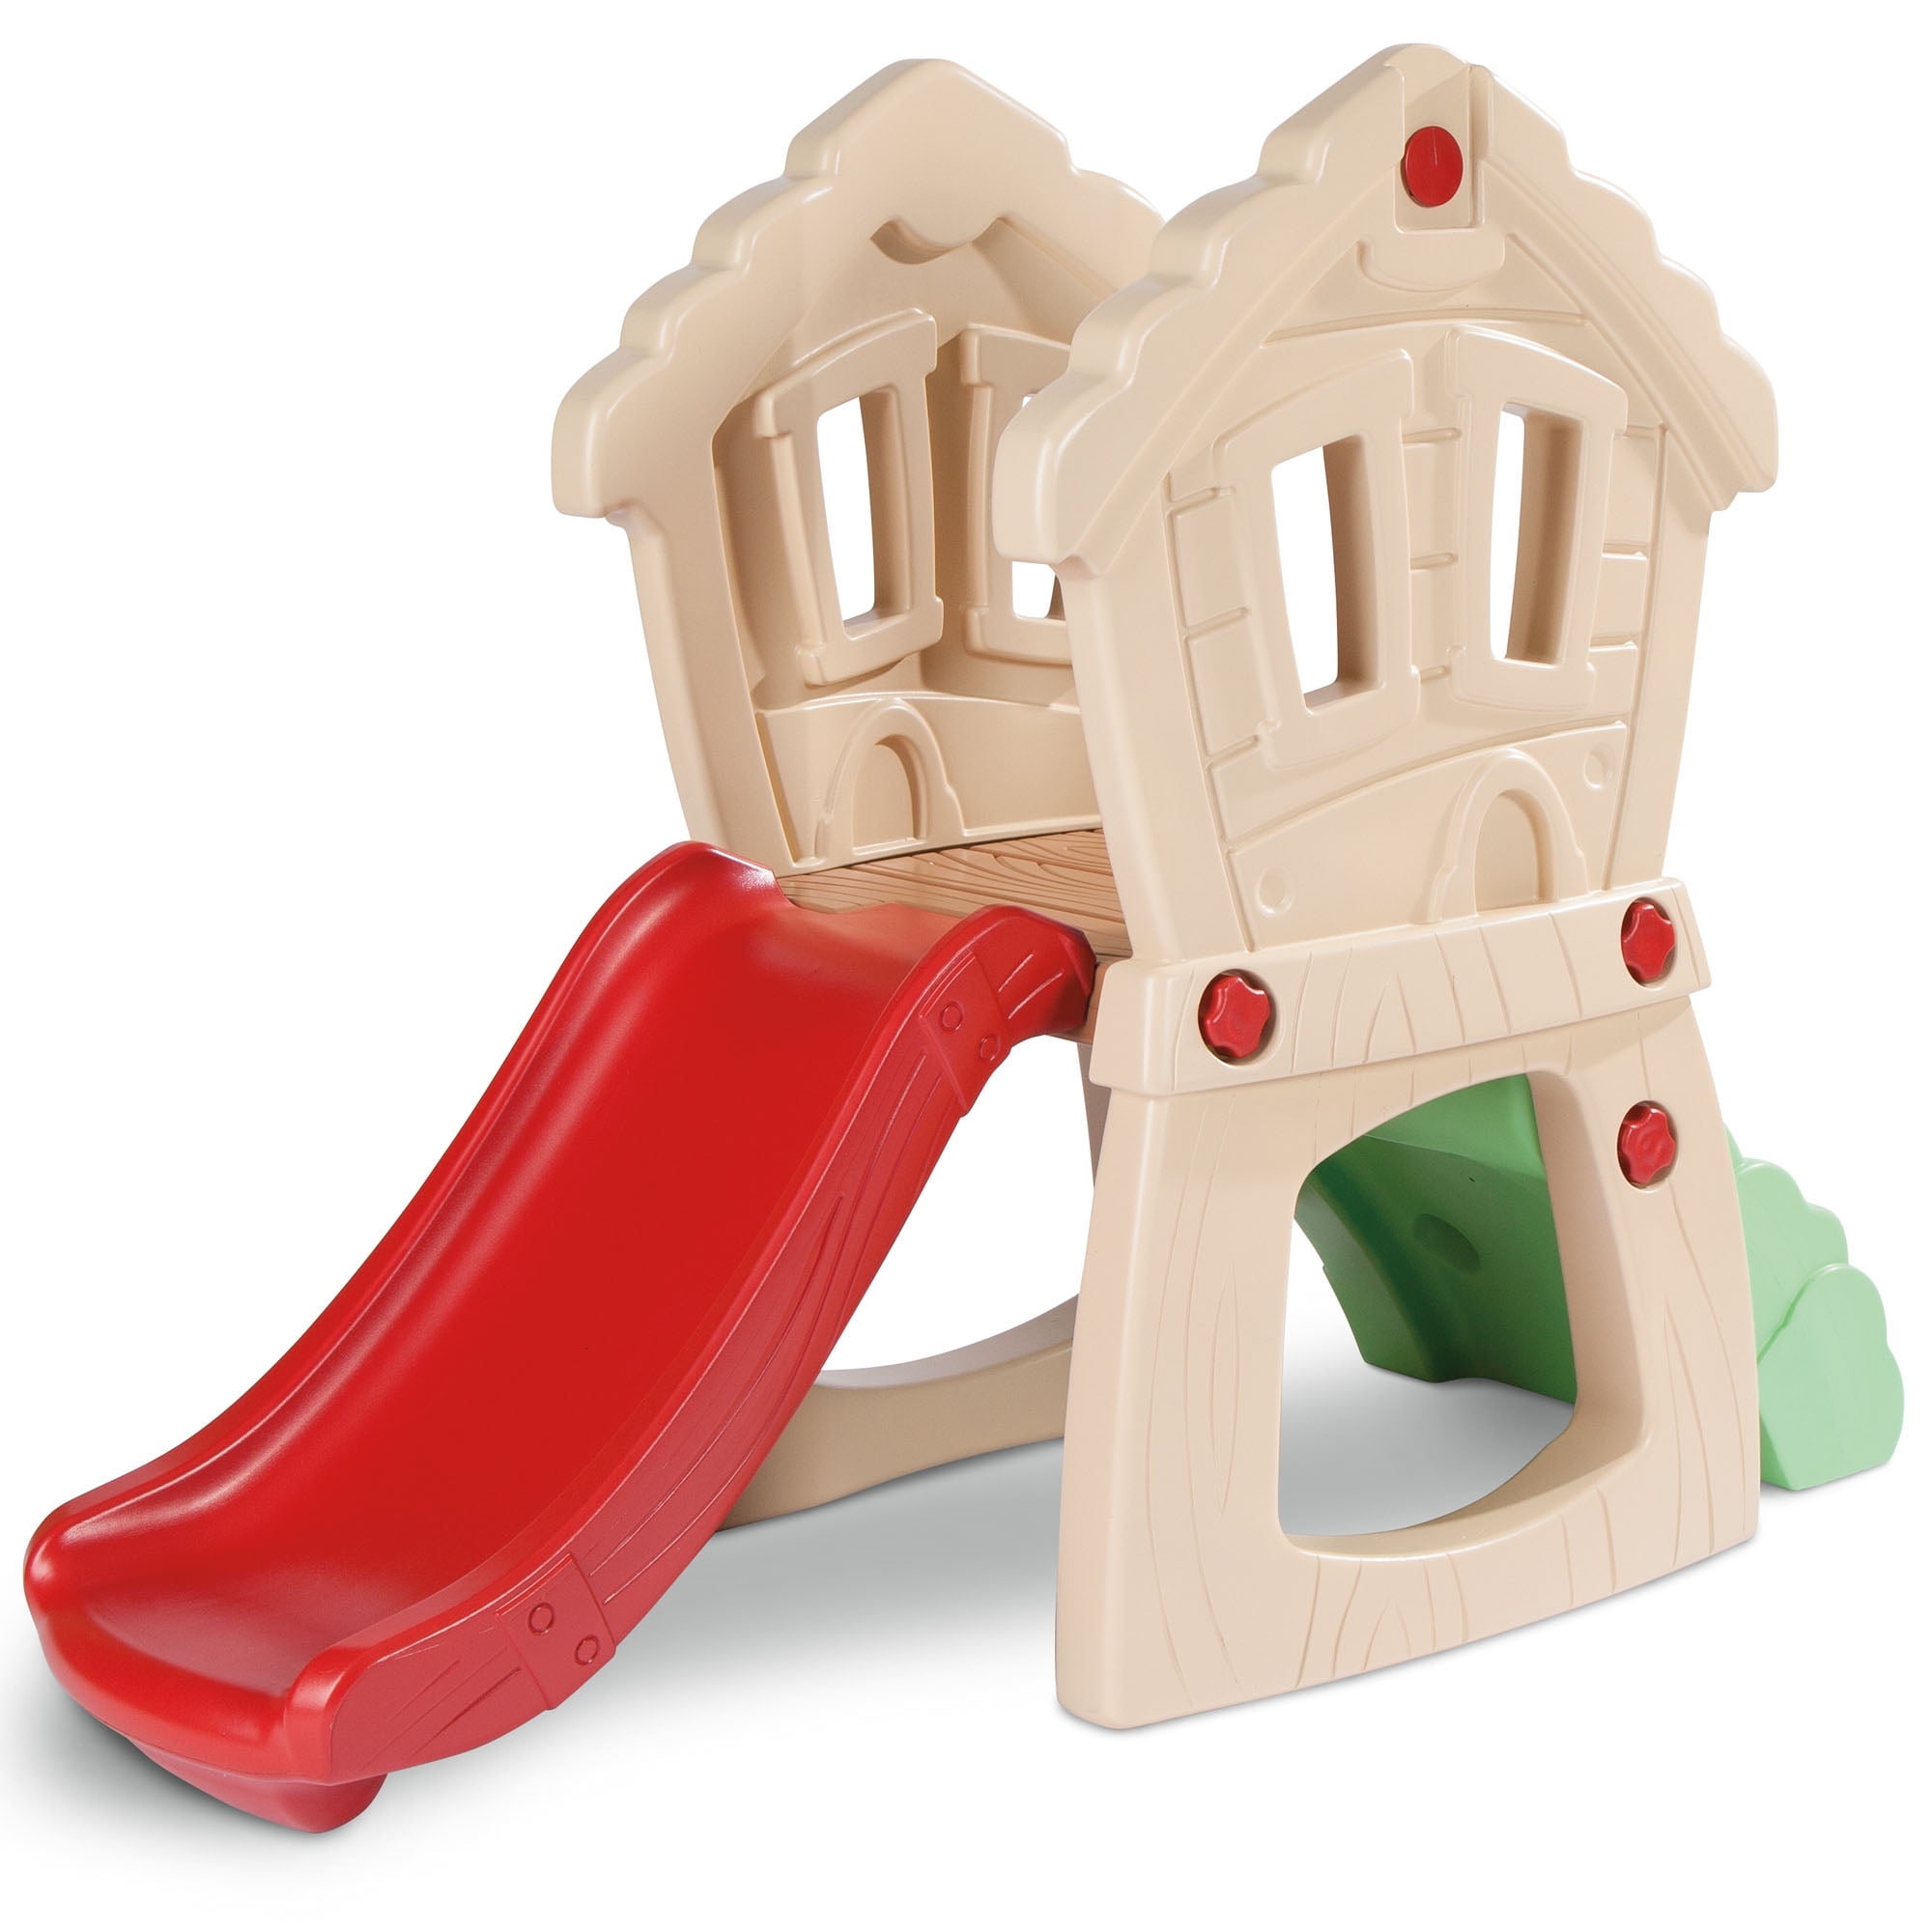 Little Tikes Hide & Seek Climber, Indoor Outdoor Slide and Climbing Playset for Kids Ages 2-5 - 1